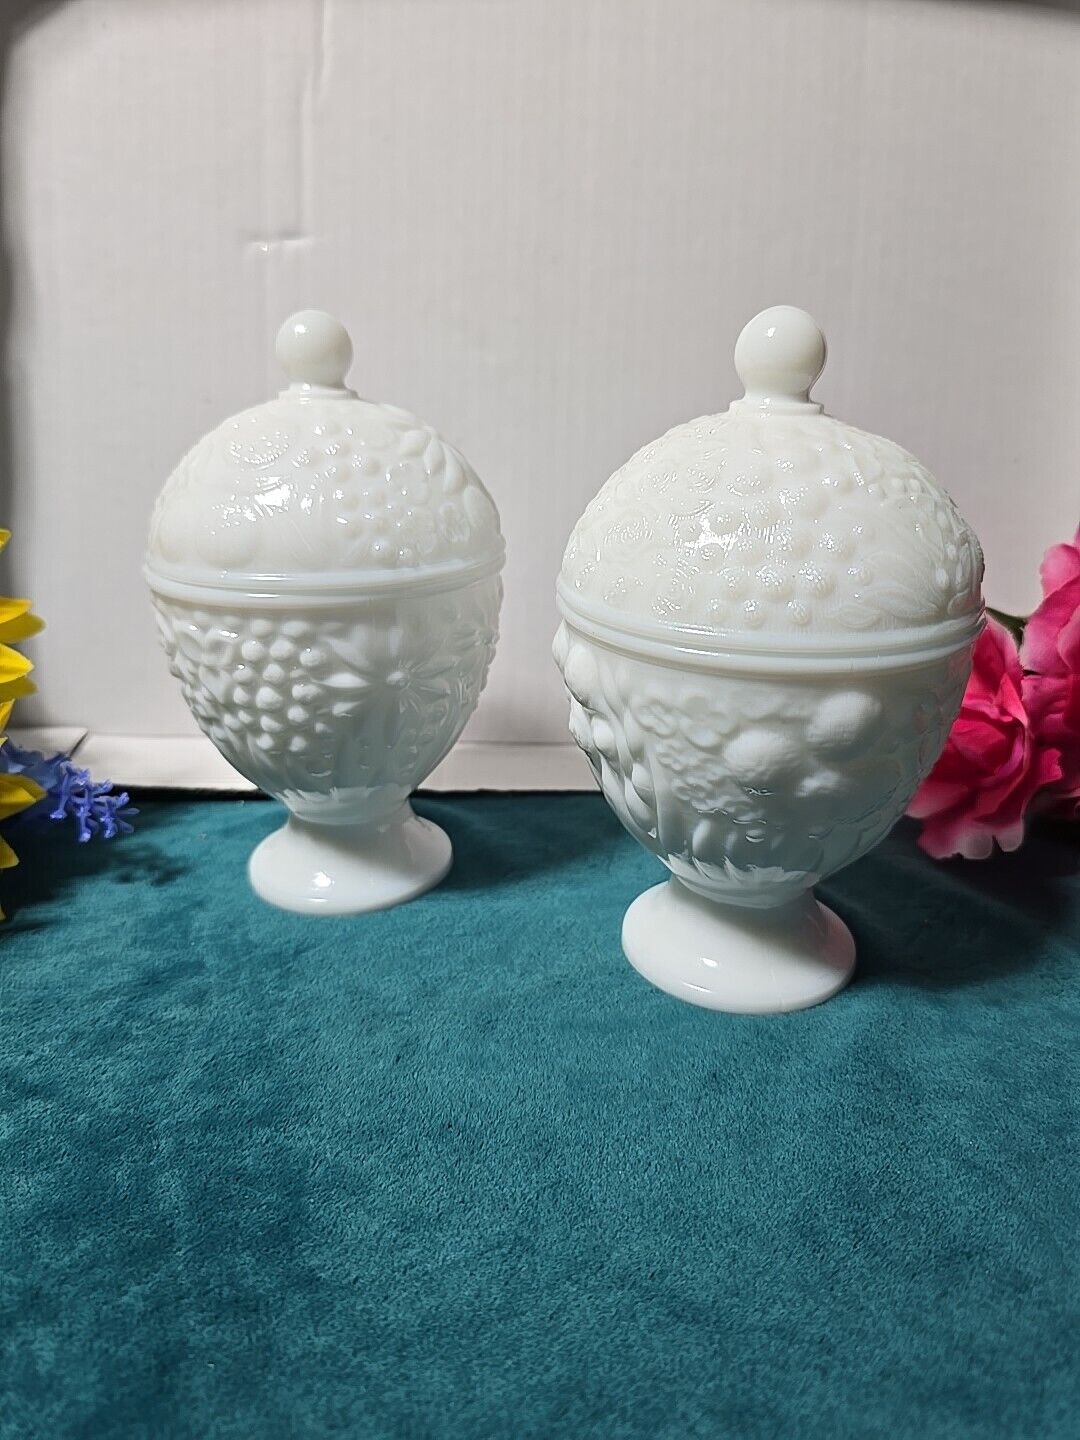 Pair Of Vintage Avon Milk Glass Lidded Candy Dishes Floral Design Oval Shape